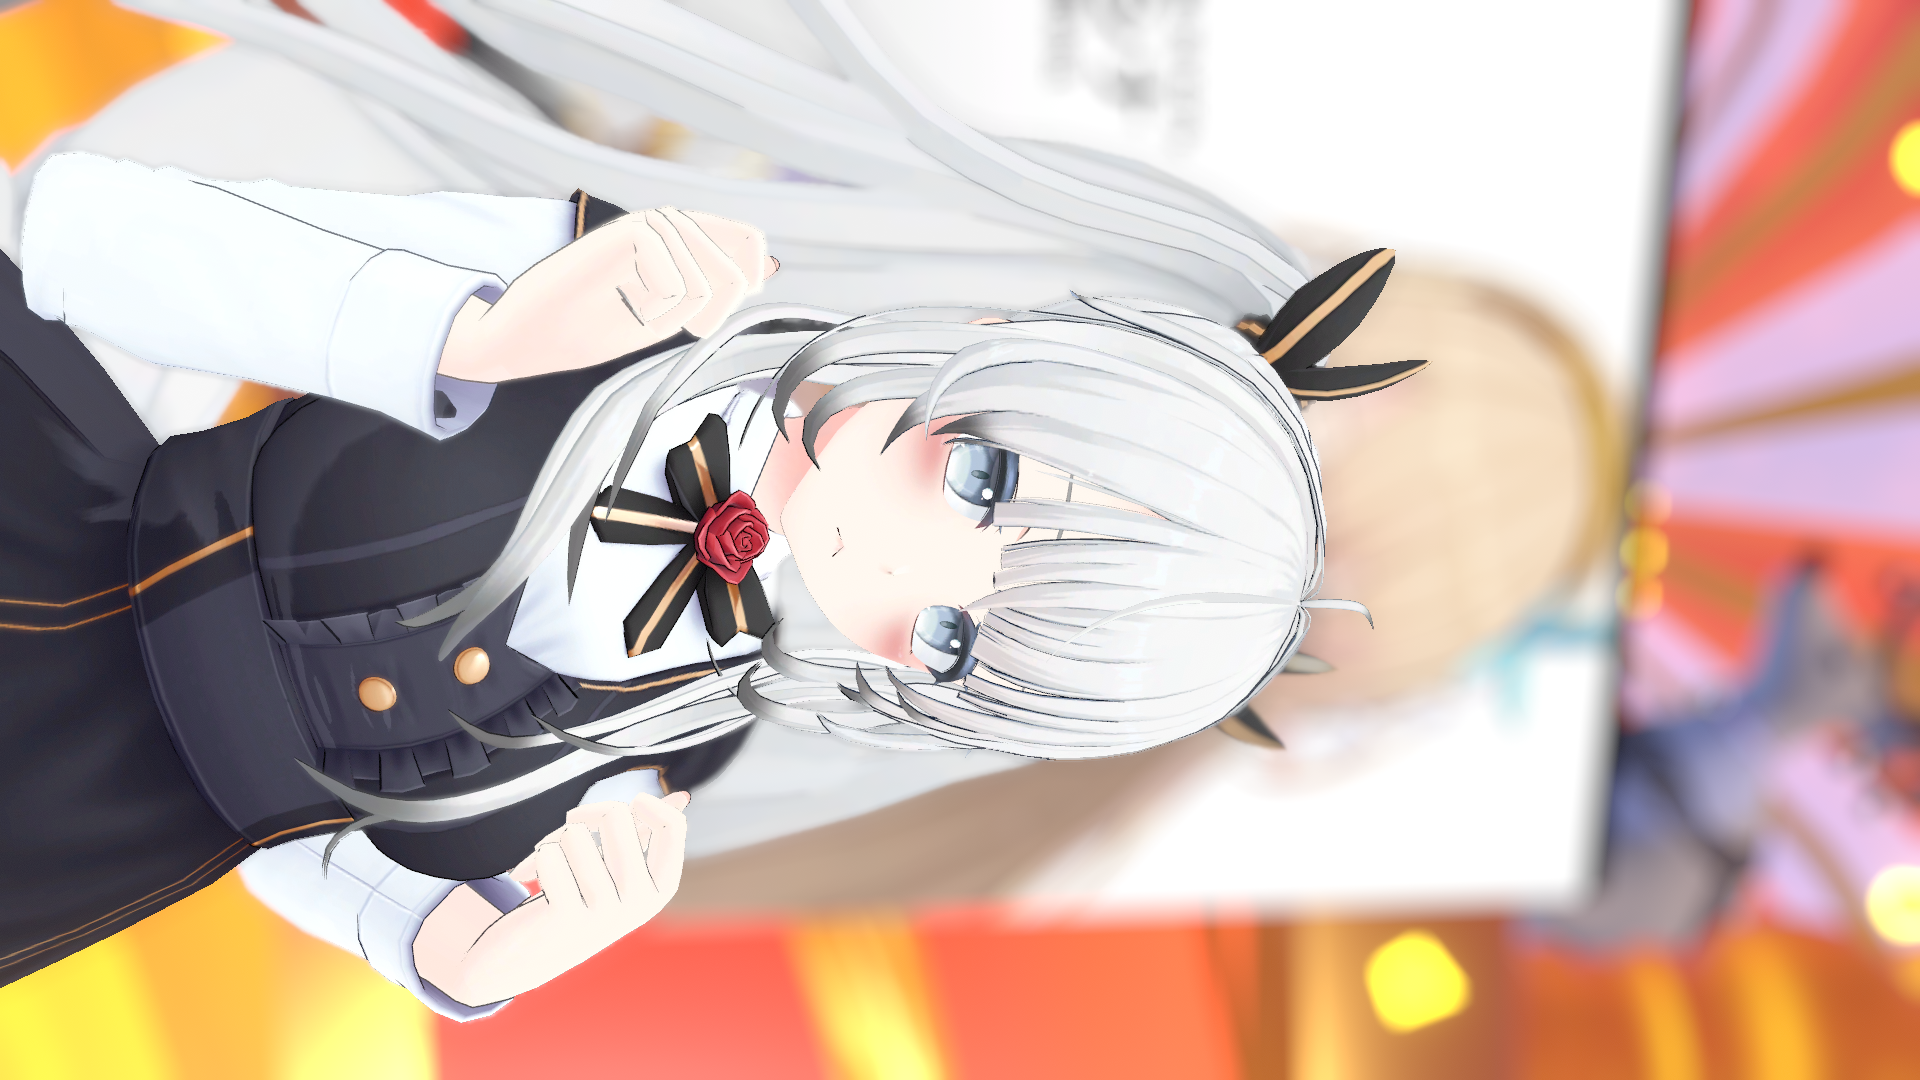 VRChat_1920x1080_2021-12-05_05-11-31.954.png